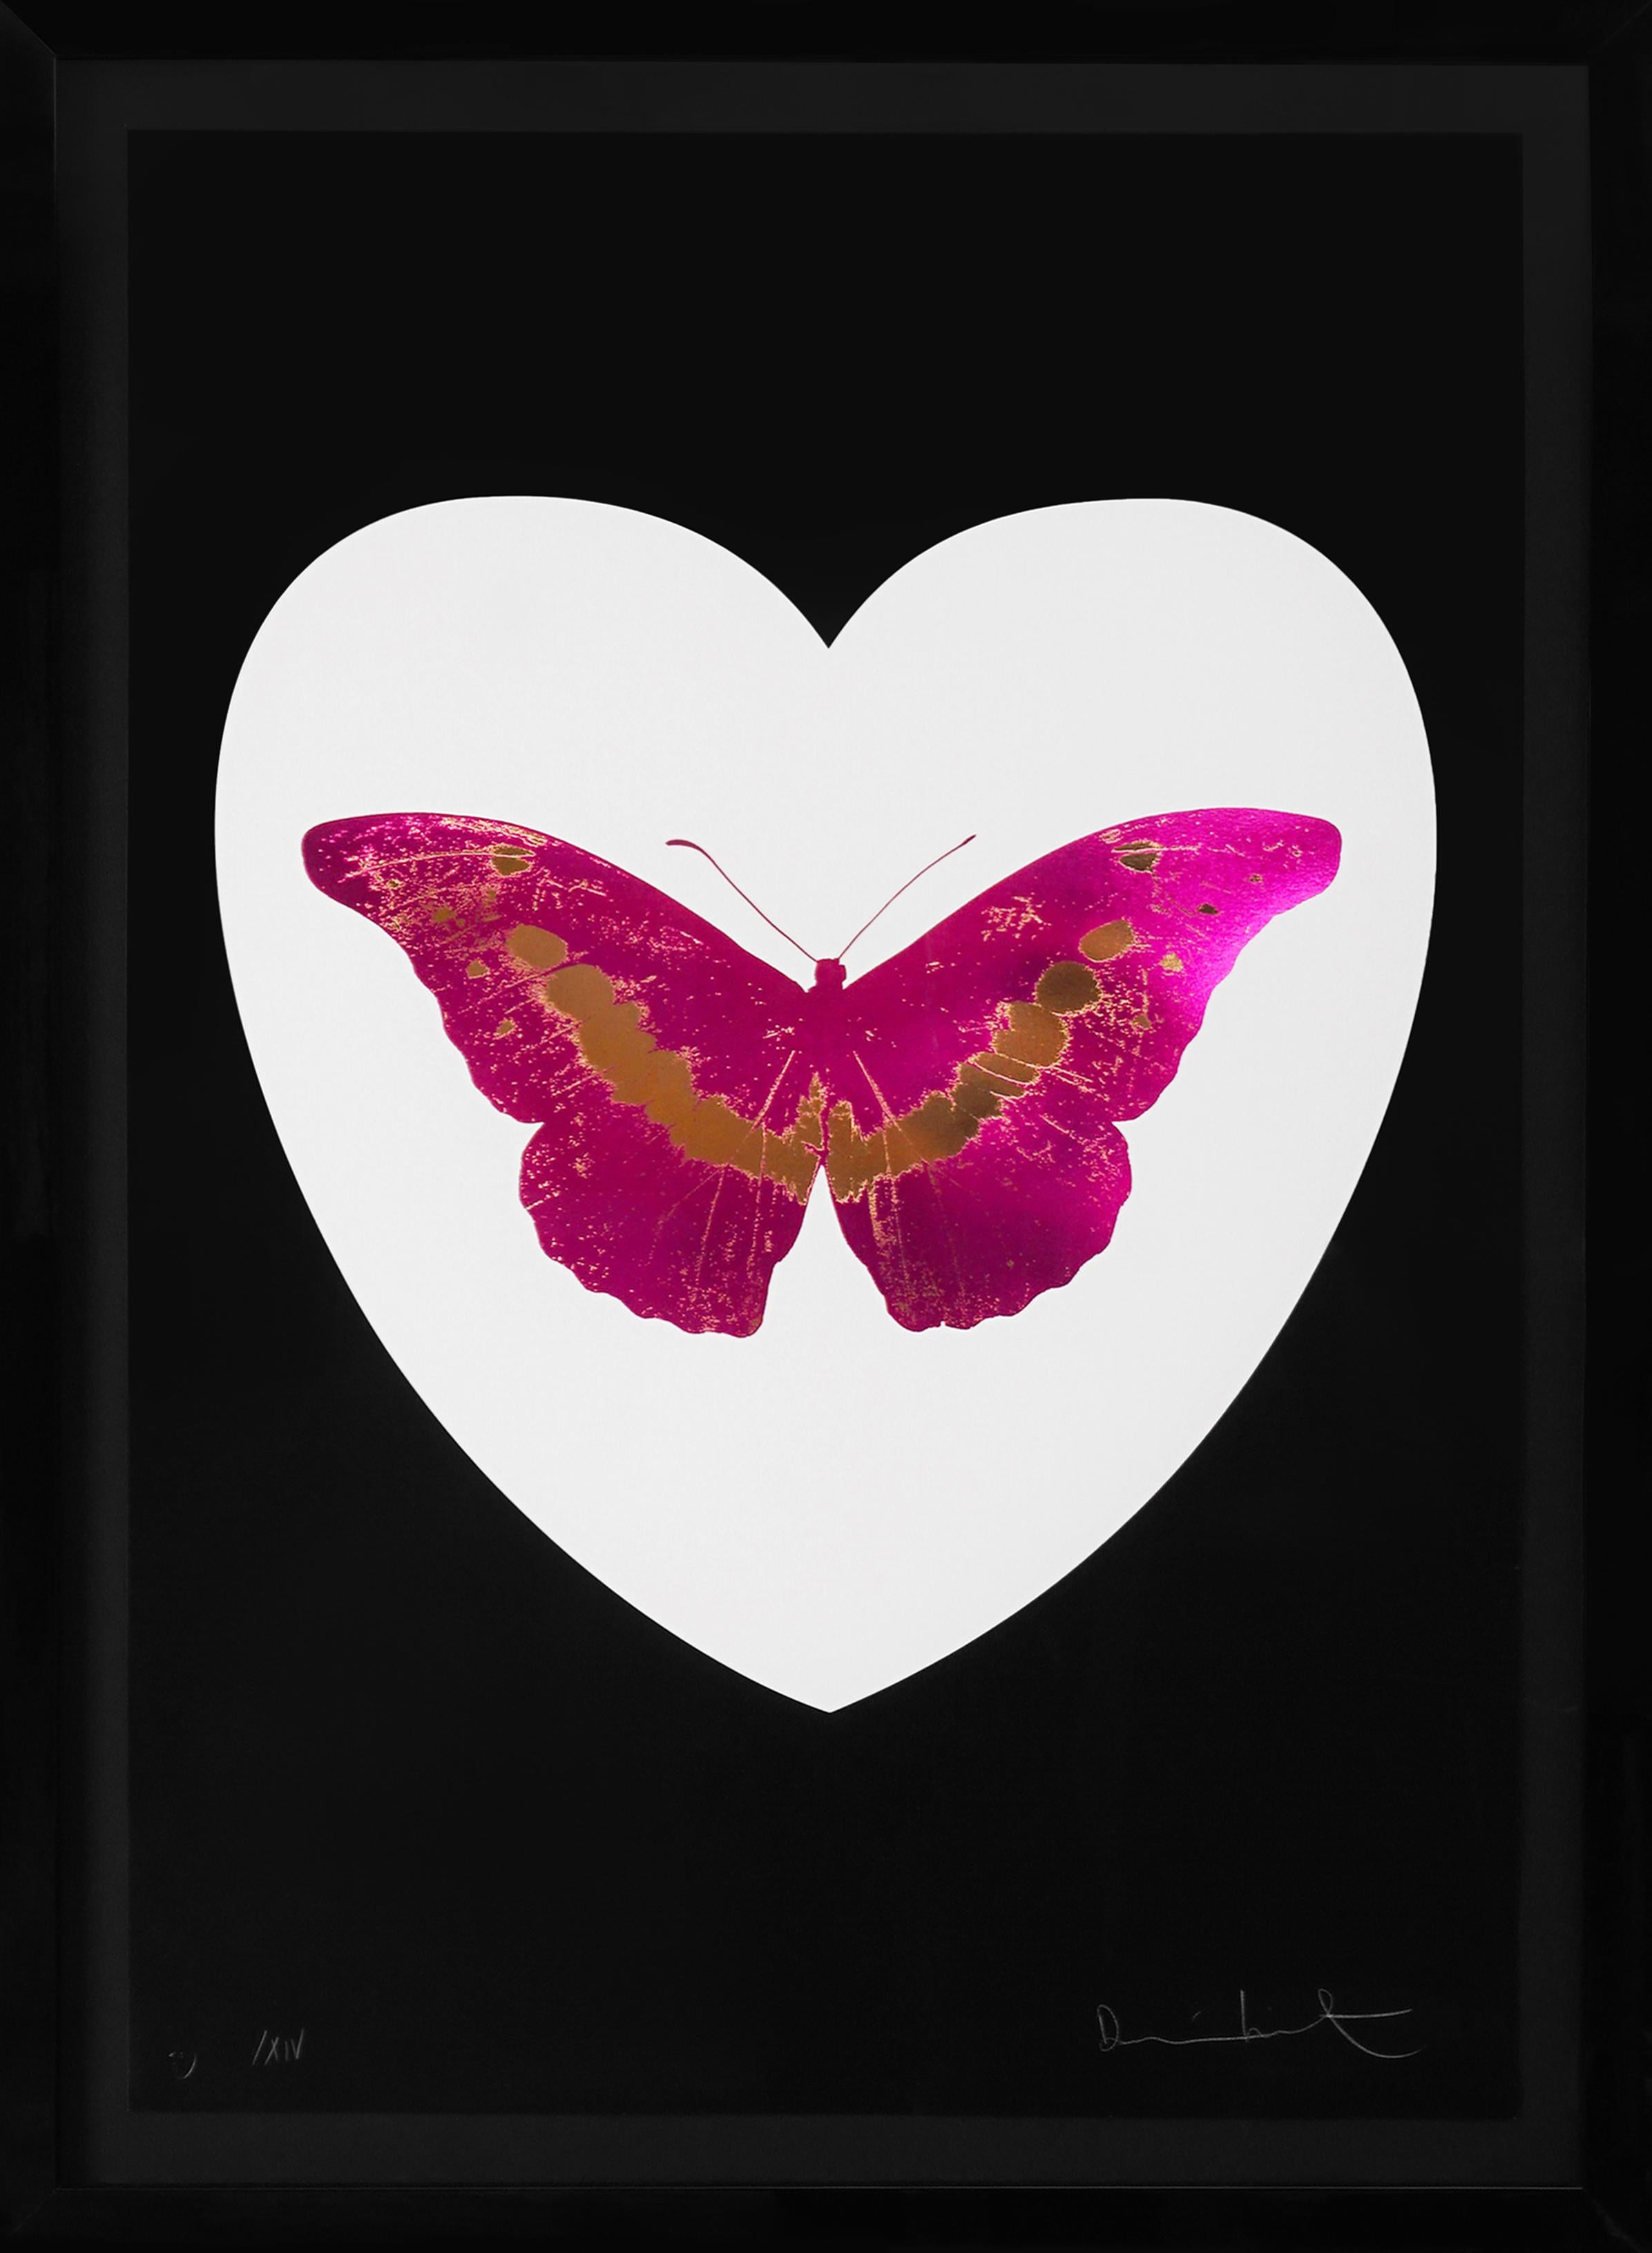 Damien Hirst Animal Print - 'I Love You' White Heart, Fuchsia/Gold Foil Block Butterfly, 2015